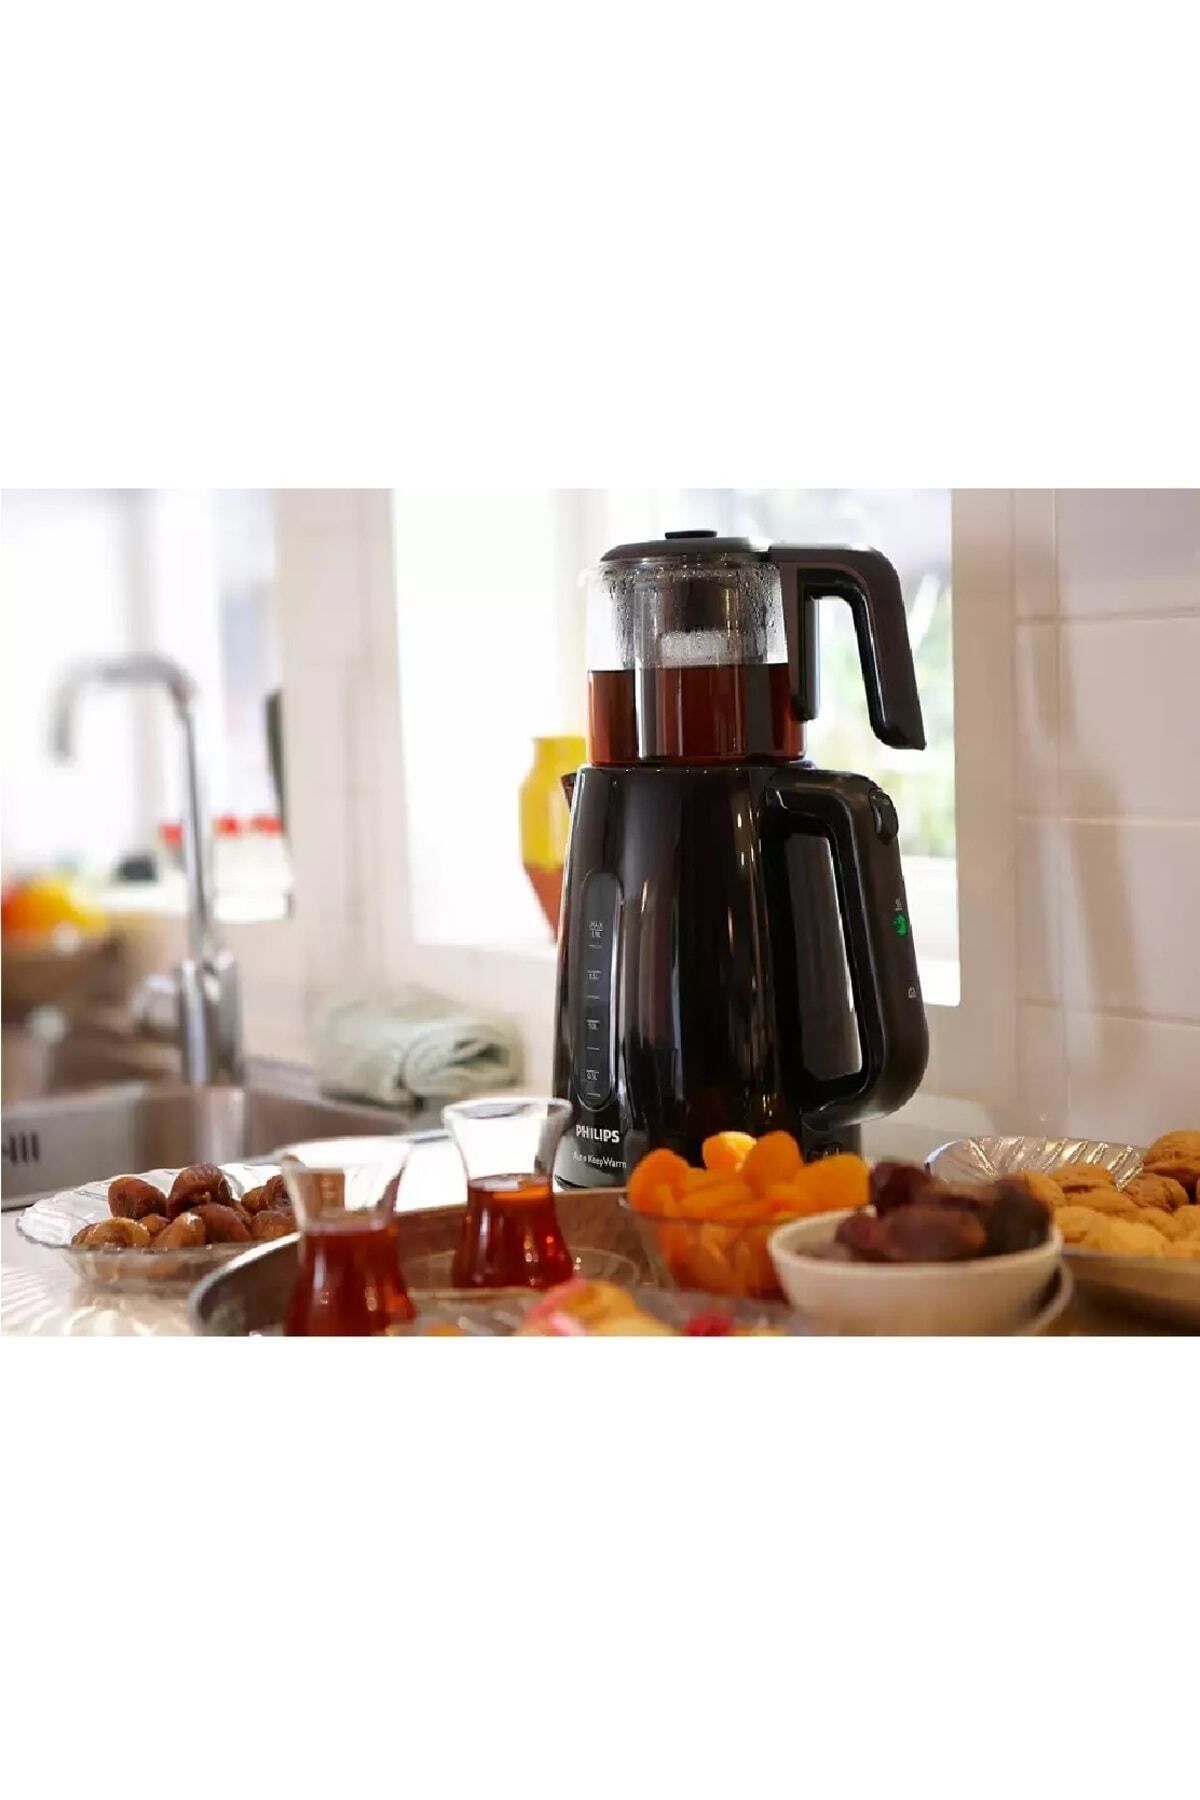 Philips Daily Collection Çay Makinesi HD7301/00